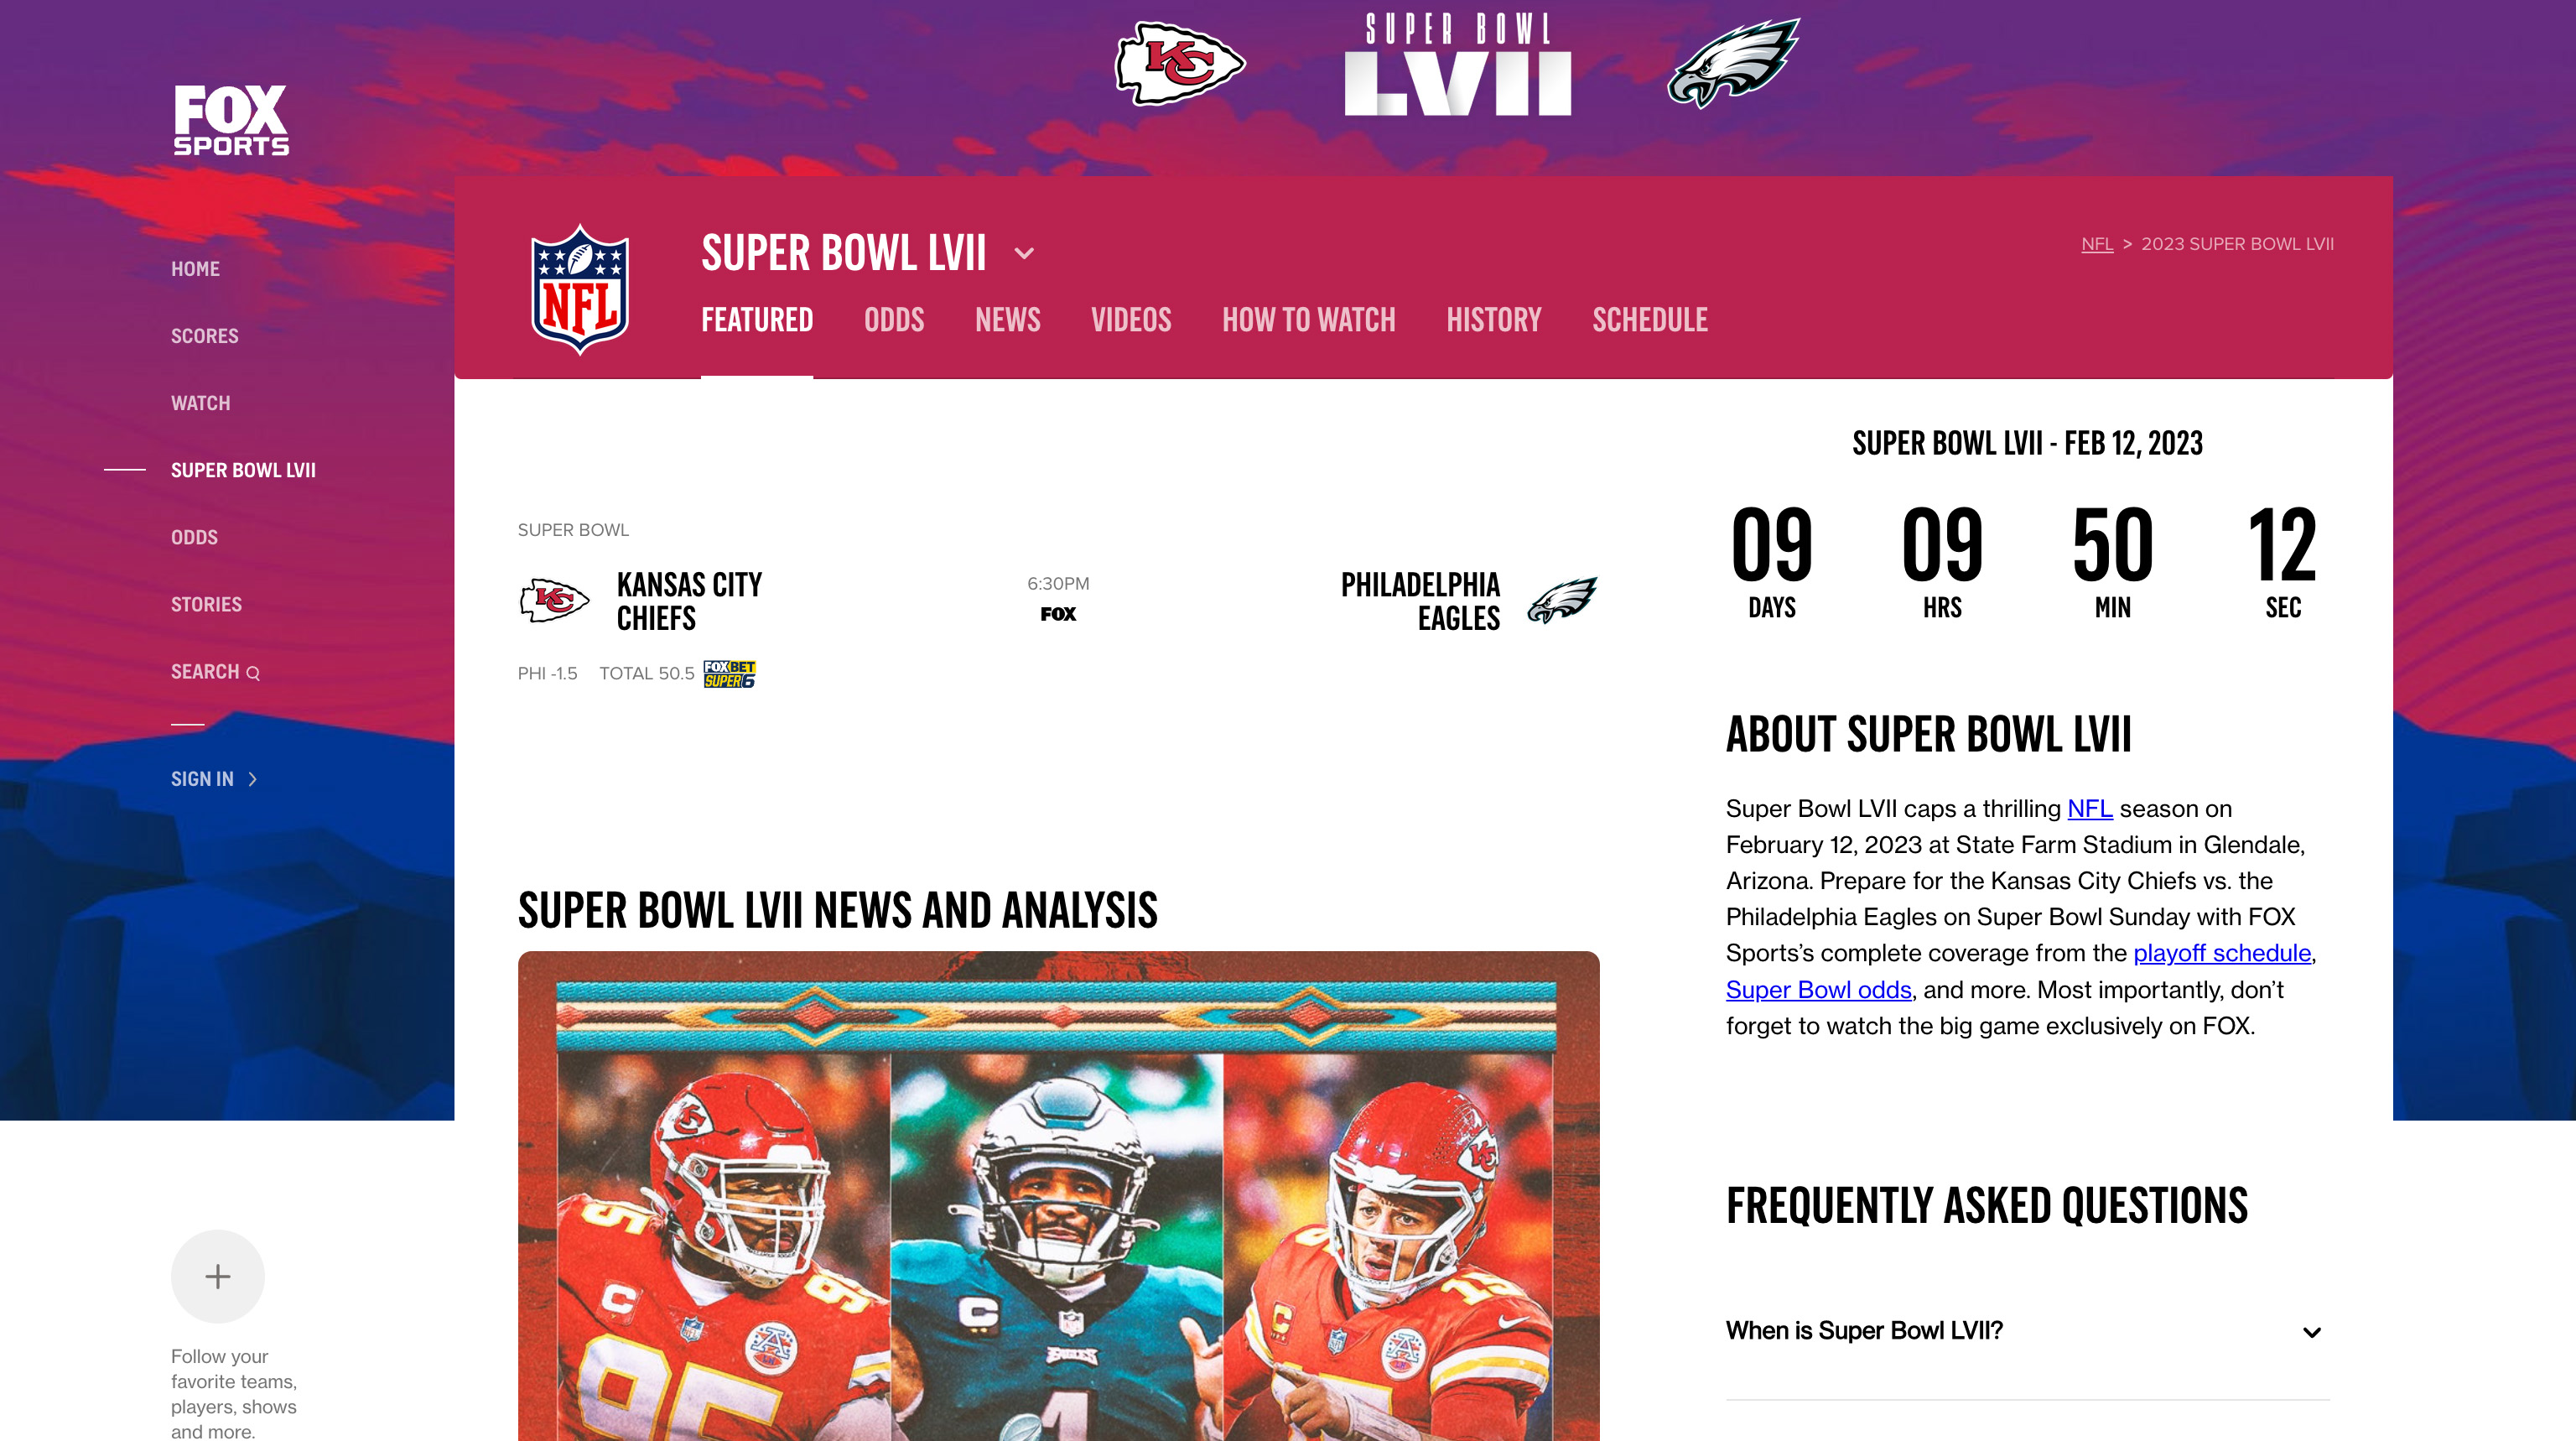 You'll be able to stream the Super Bowl for free (legally)